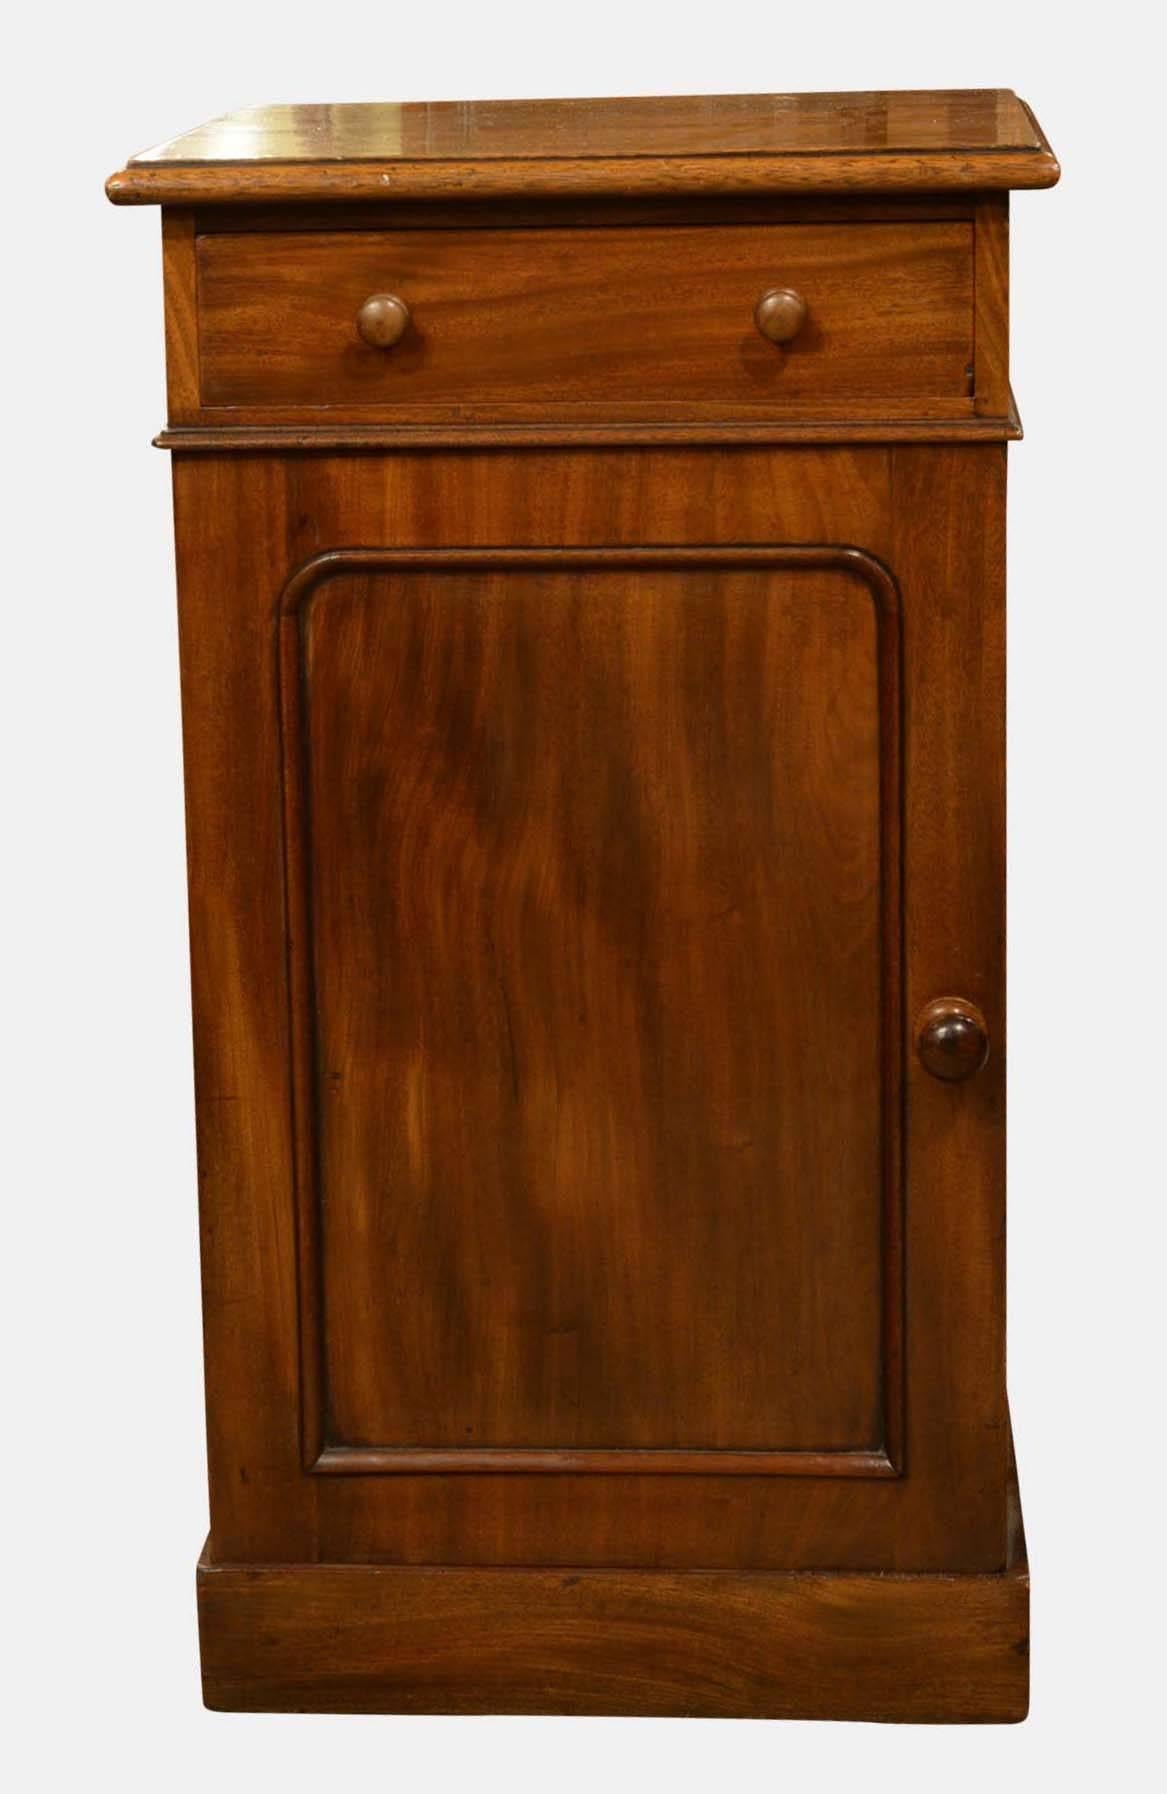 A good mid-19th century mahogany bedside/lamp cupboard with single drawer.

circa 1850.